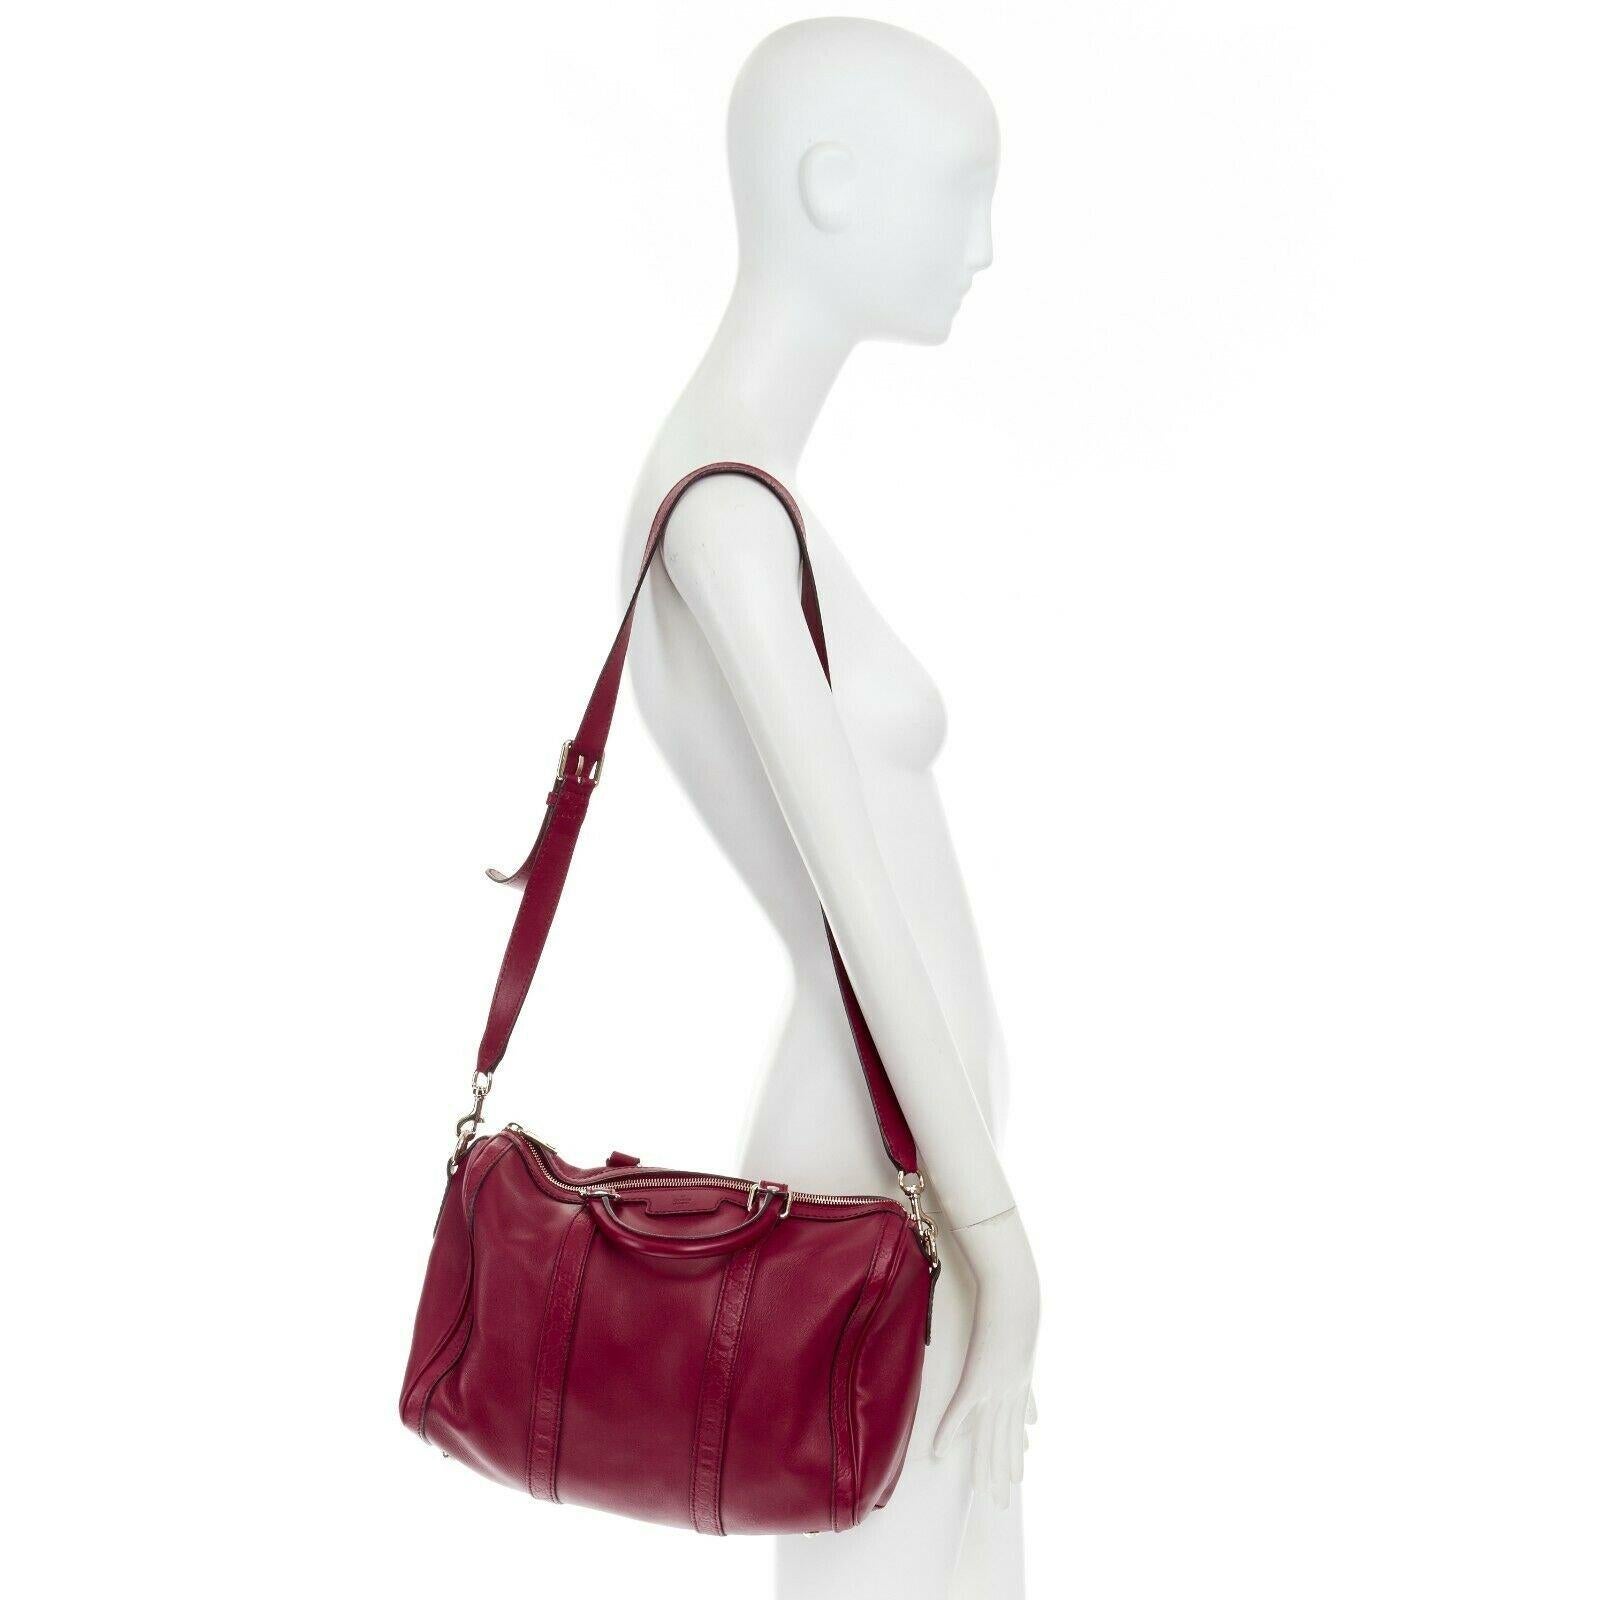 GUCCI red leather GG Microguccissima trimmed dual handle Boston shoulder bag 
Reference: TGAS/A02826 
Brand: Gucci 
Model: 247205 525040 
Material: Leather 
Color: Red 
Pattern: Solid 
Closure: Zip 
Extra Detail: Boston bag. Cranberry red leather